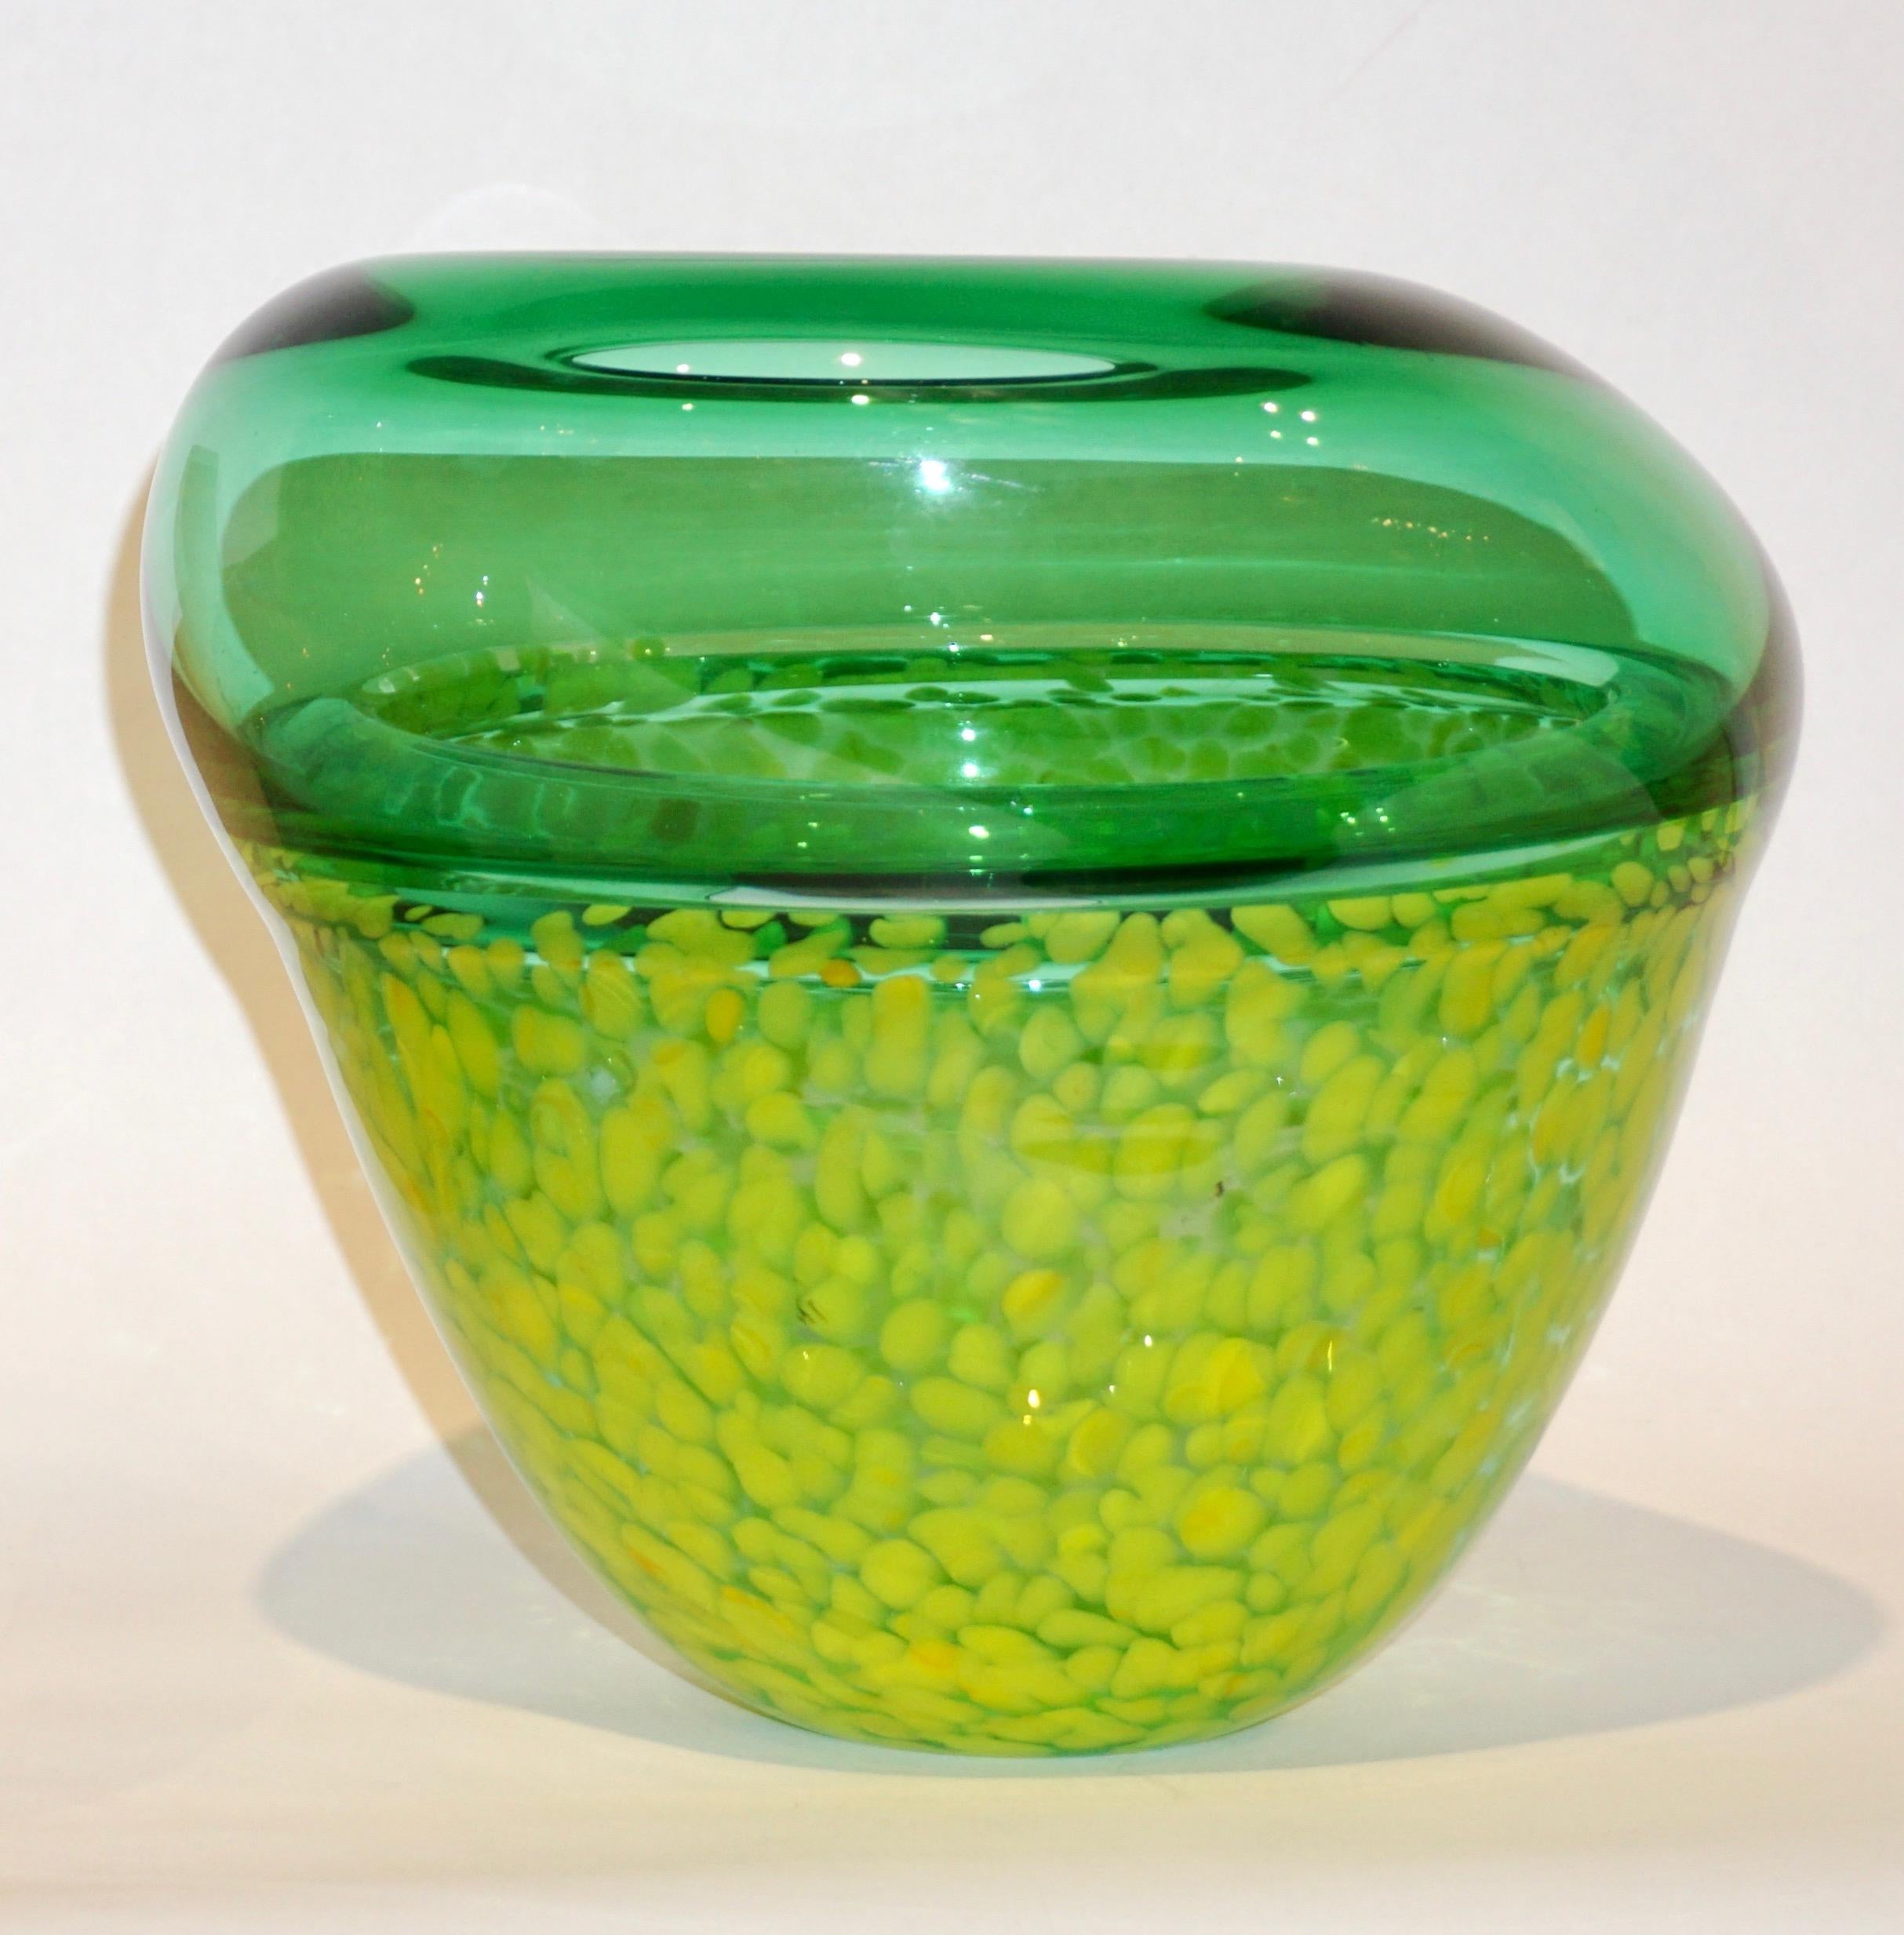 Hand-Crafted Hilton McConnico by Formia 1990s Italian Green Spotted Murano Art Glass Vase